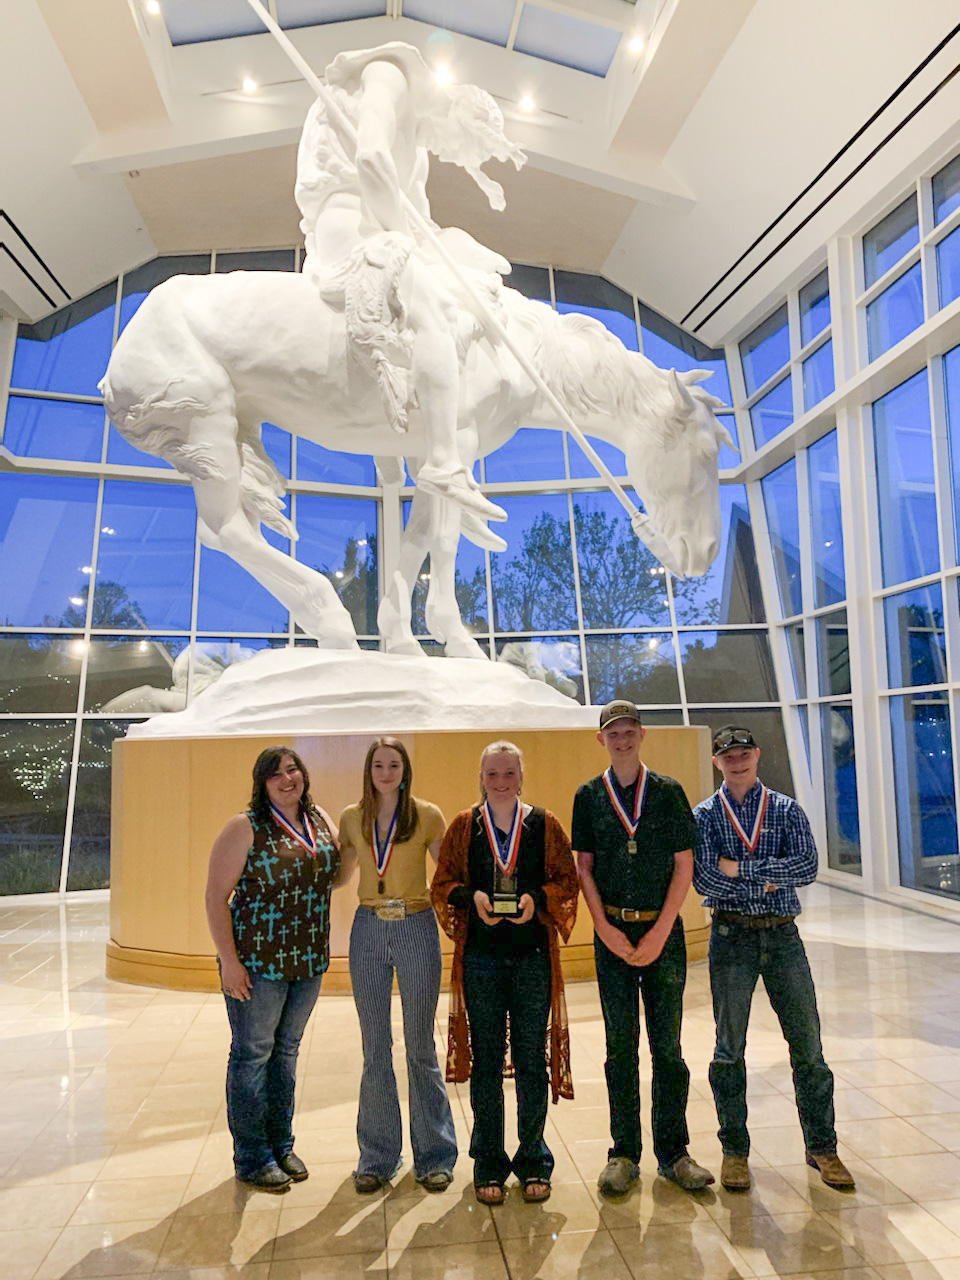 McKenzie County's team placed fourth overall in range judging. Team members were, from left to right, coach Devan Leo, Sylvia Boekelman, Paige Delaney, Luke Smith and Ryan Pingel. (NDSU photo)